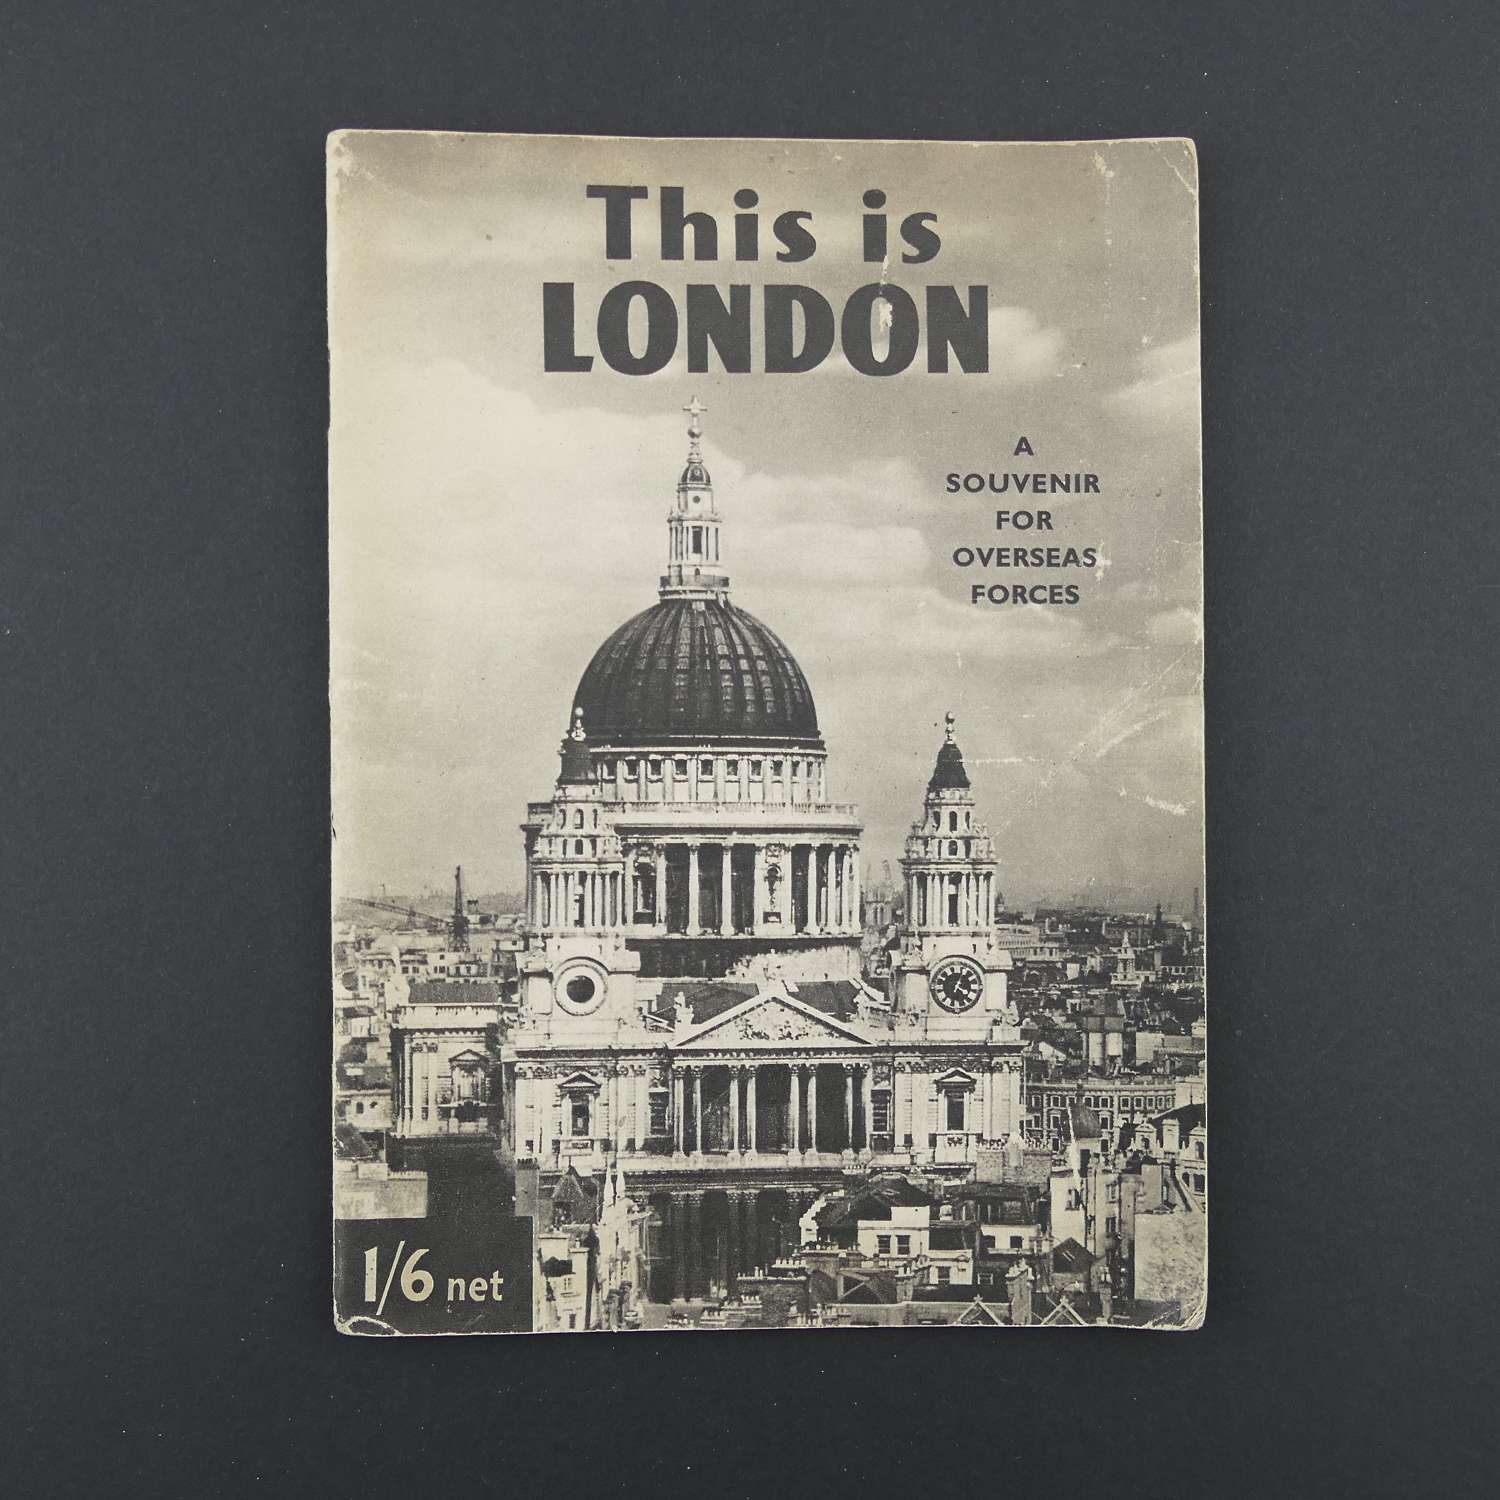 This is London - A Souvenir for Overseas Forces